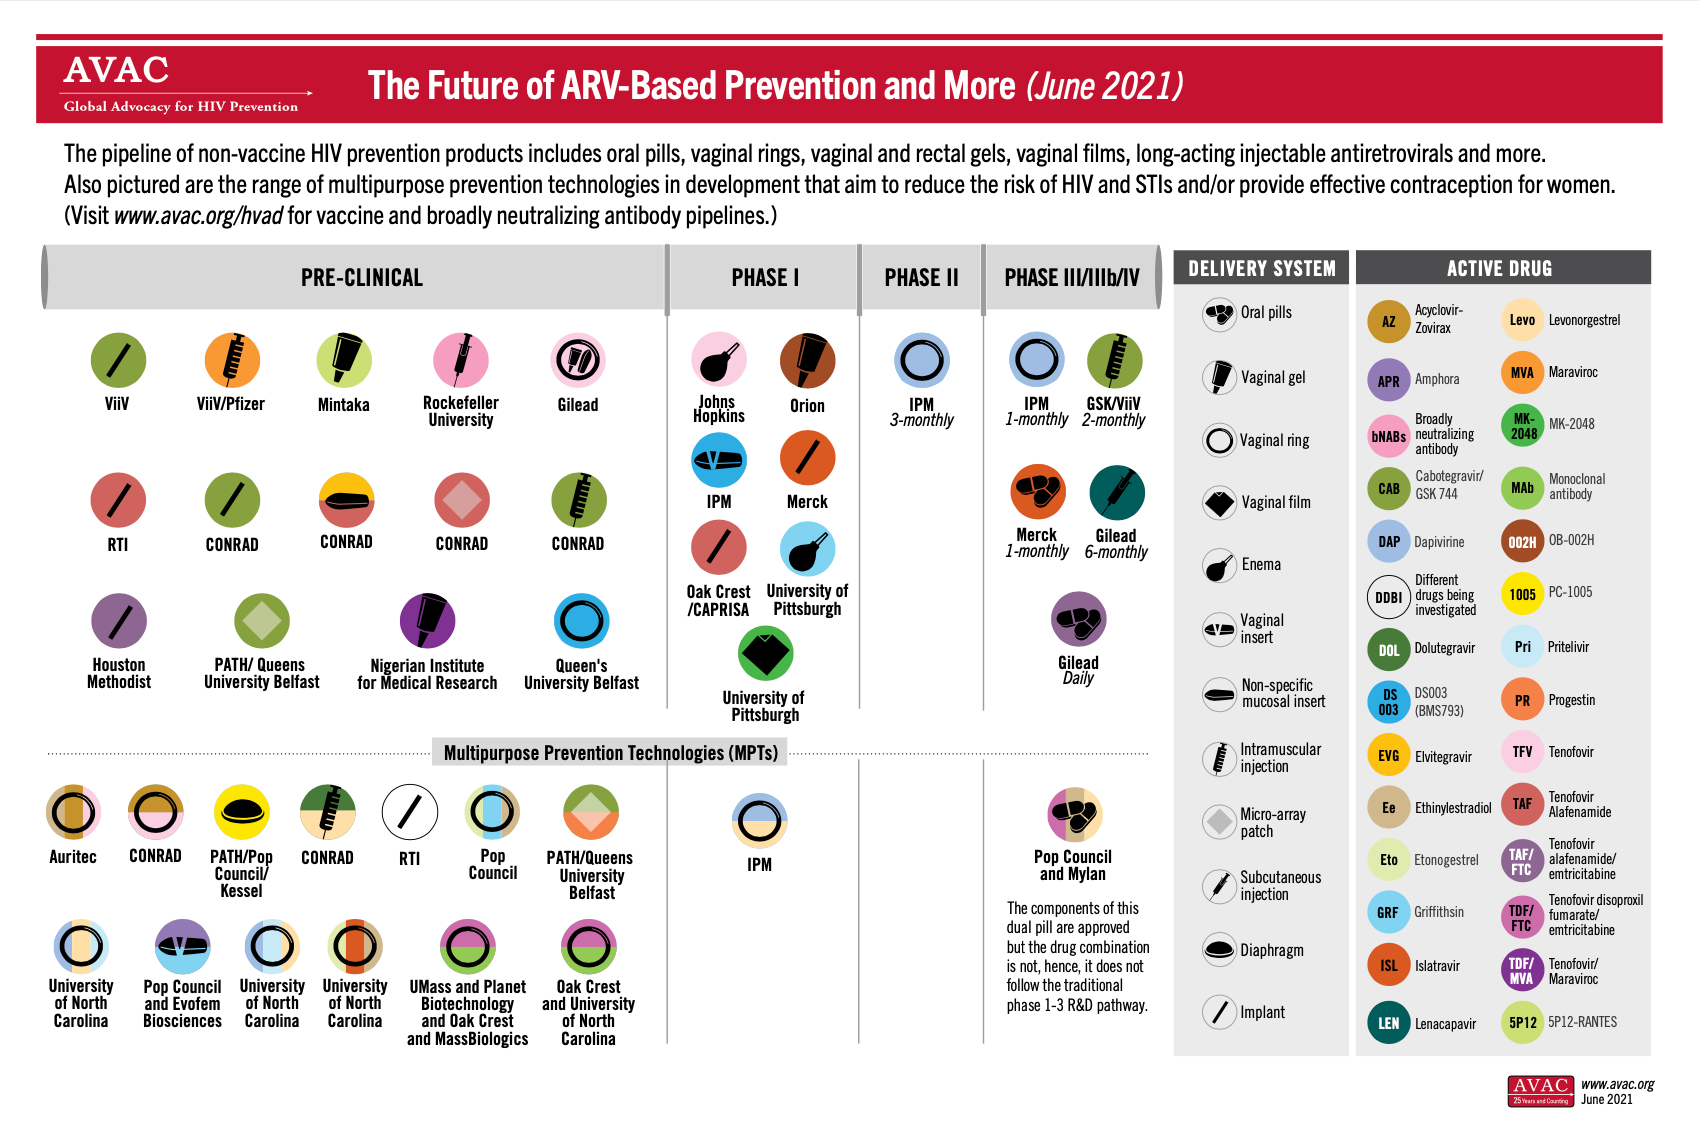 The Future of ARV-Based Prevention and More graphic